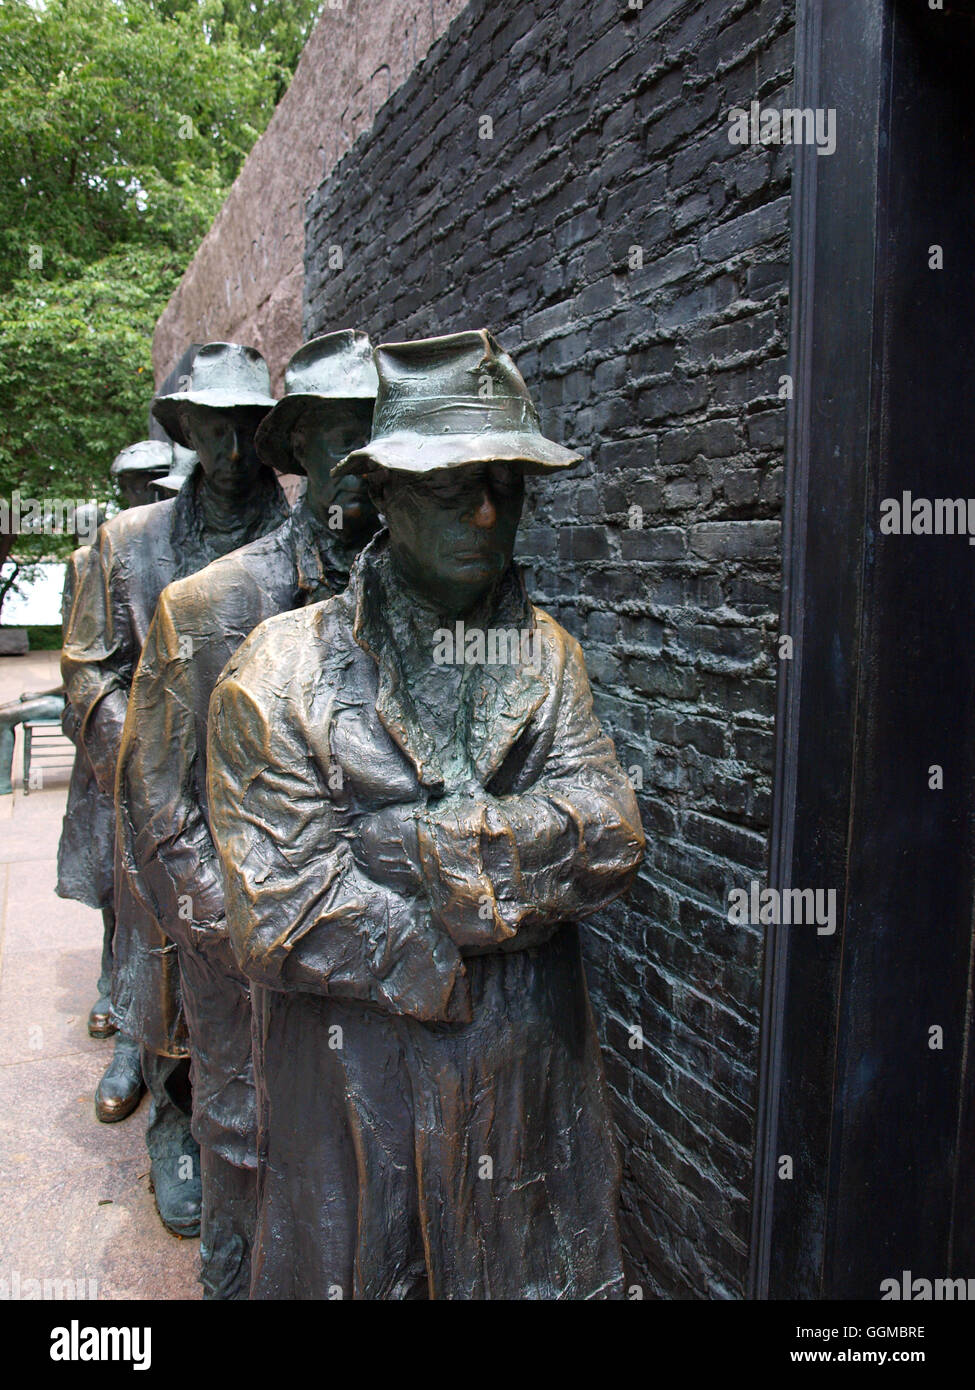 statues of unemployed men standing in a bread line during the Great Depression at the FDR Memorial in Washington, D.C. Stock Photo